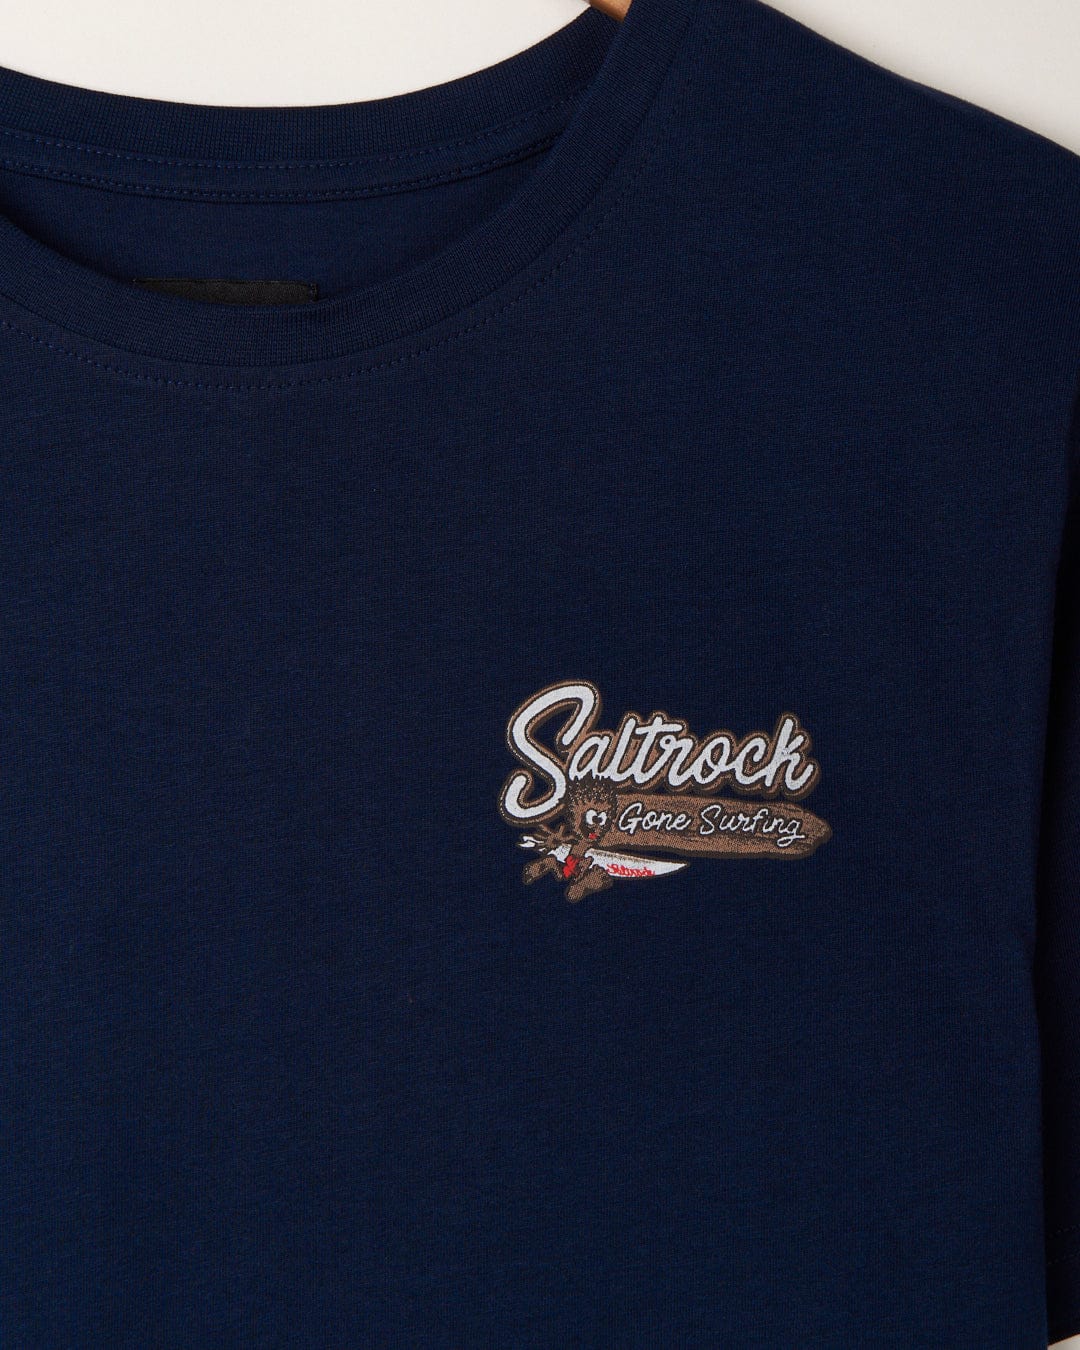 A Beach Signs Cornwall t-shirt with the word Saltrock on it, featuring a peached soft hand feel.